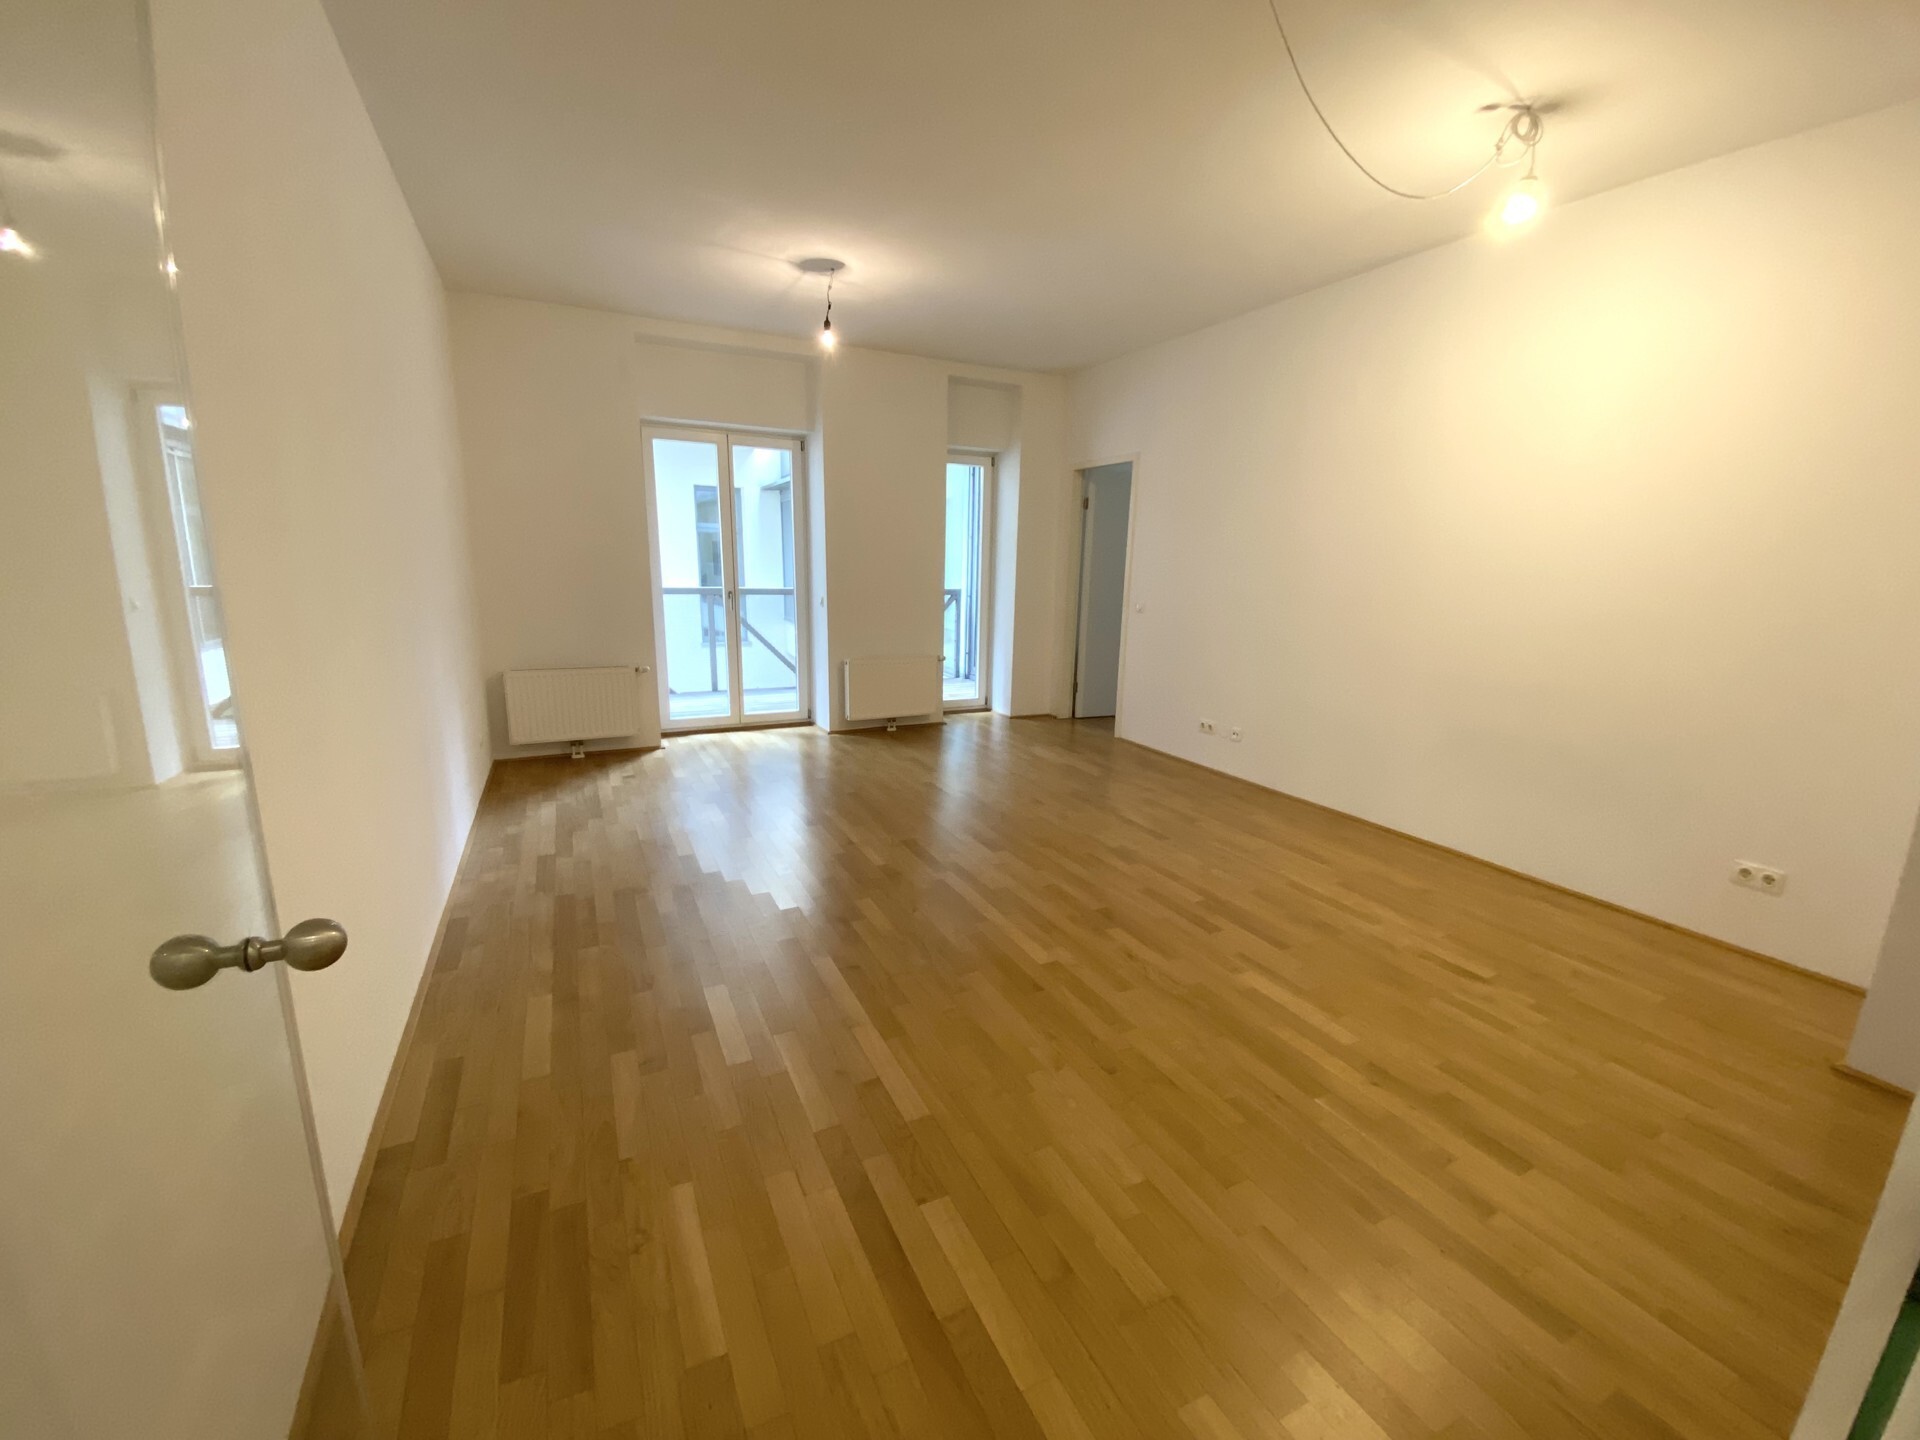 3-room apartment with loggia in the most central location directly on Rotenturmstraße for rent in 1010 Vienna